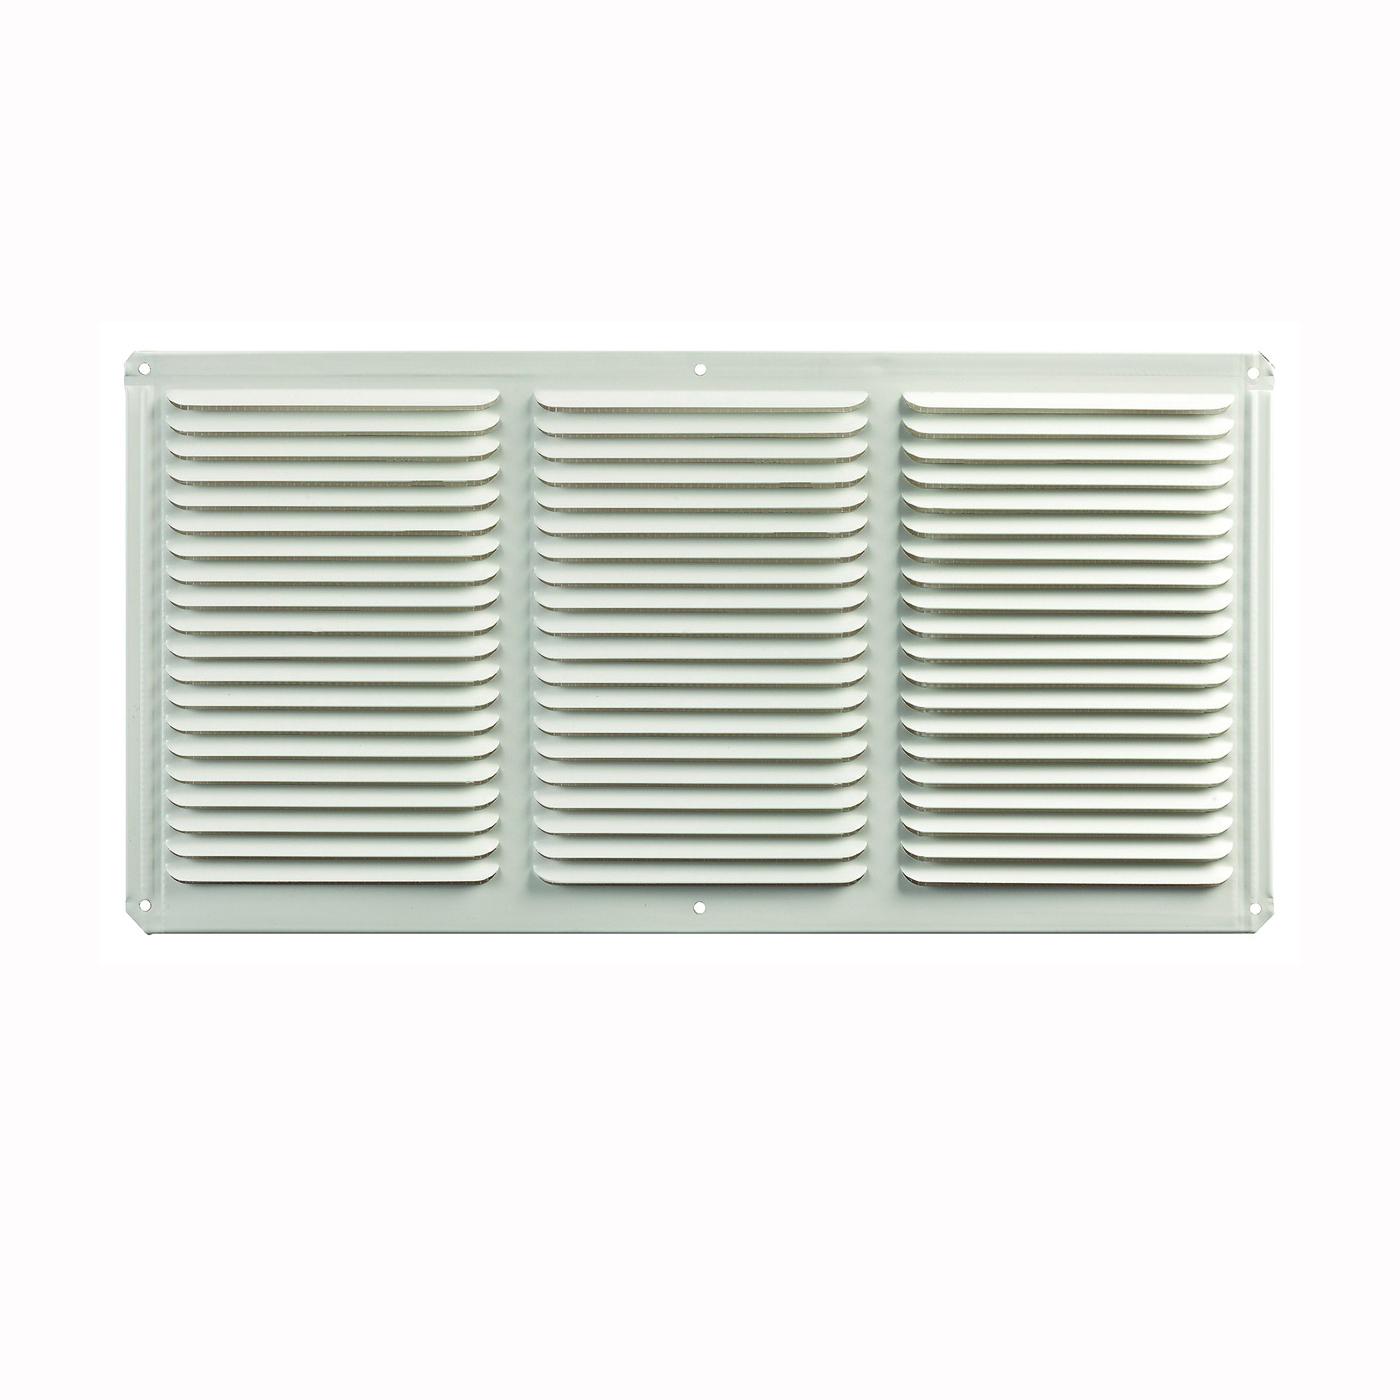 Master Flow EAC16X8W Undereave Vent, 8 in L, 16 in W, 65 sq-ft Net Free Ventilating Area, Aluminum, White - 1